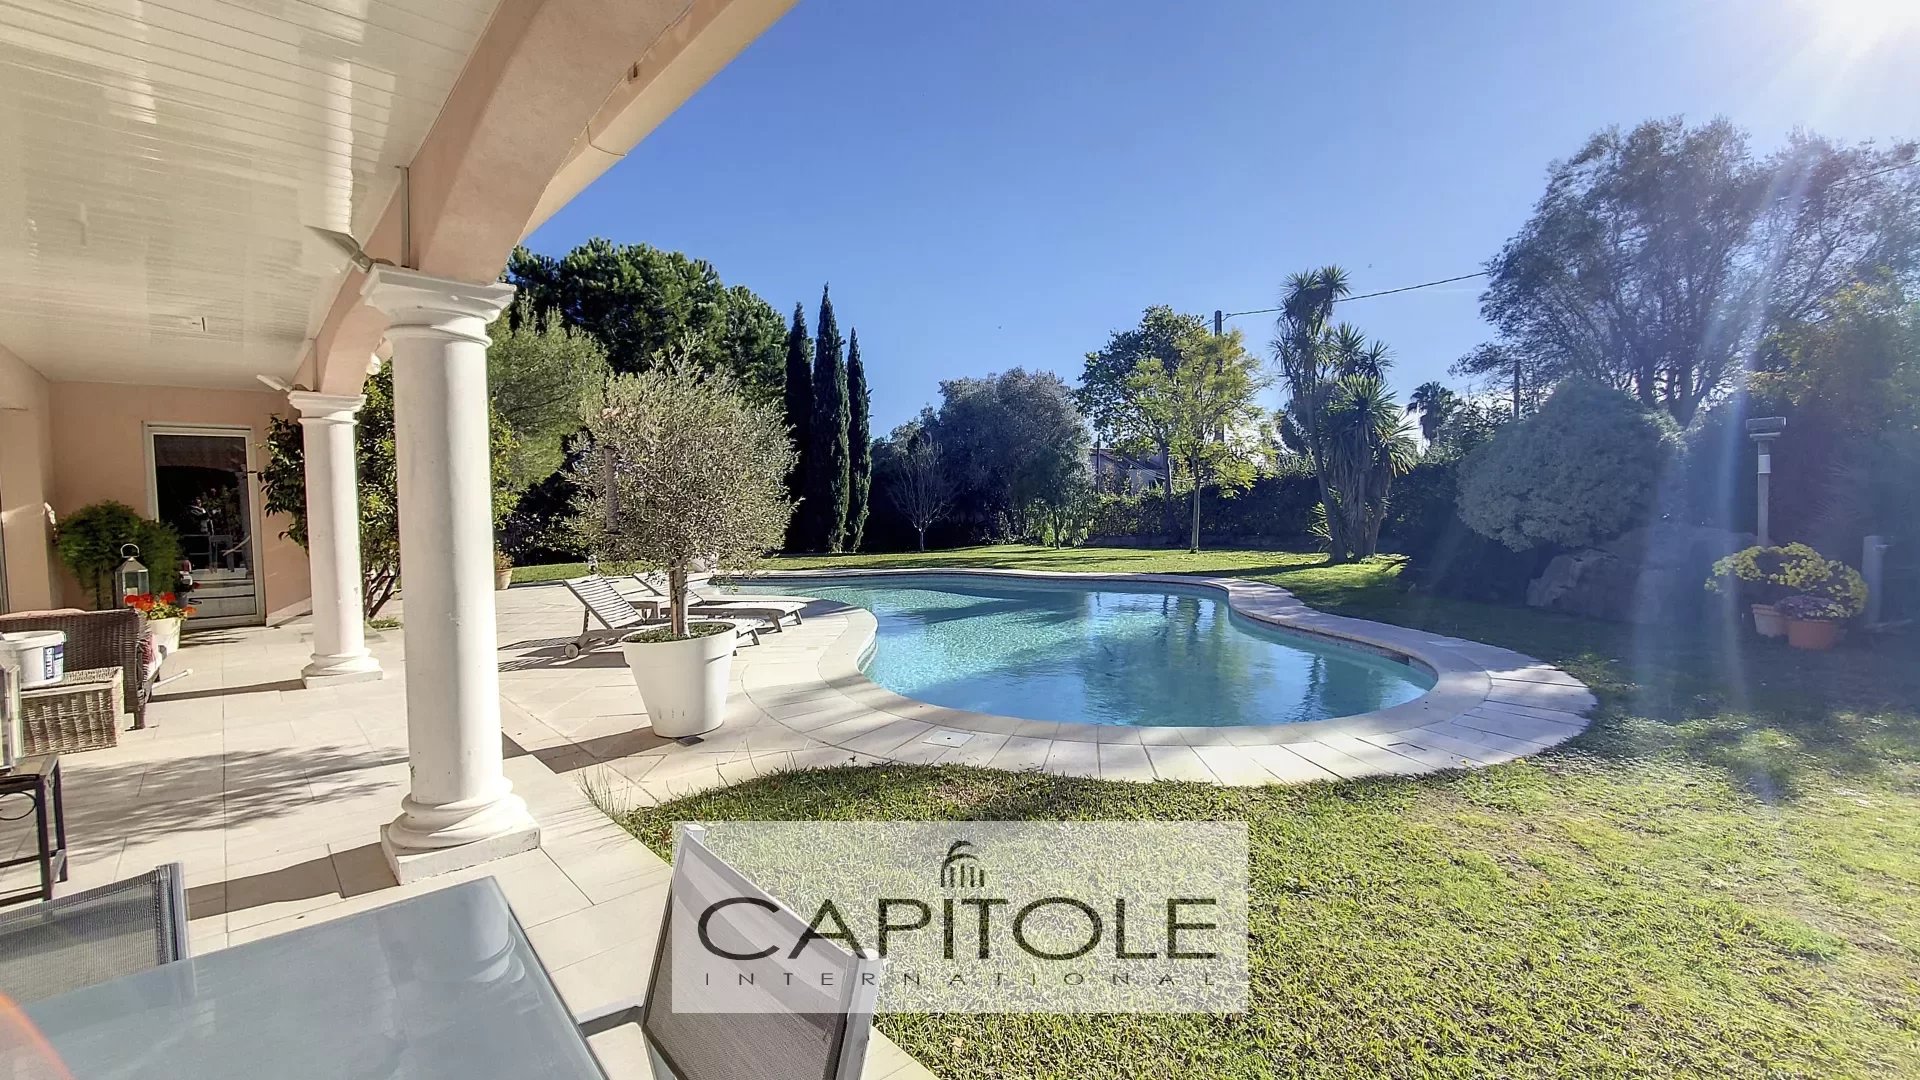 ANTIBES - SOLE AGENT PROPERTY - Superb single-storey property with pool on wooded land of 3200 m²